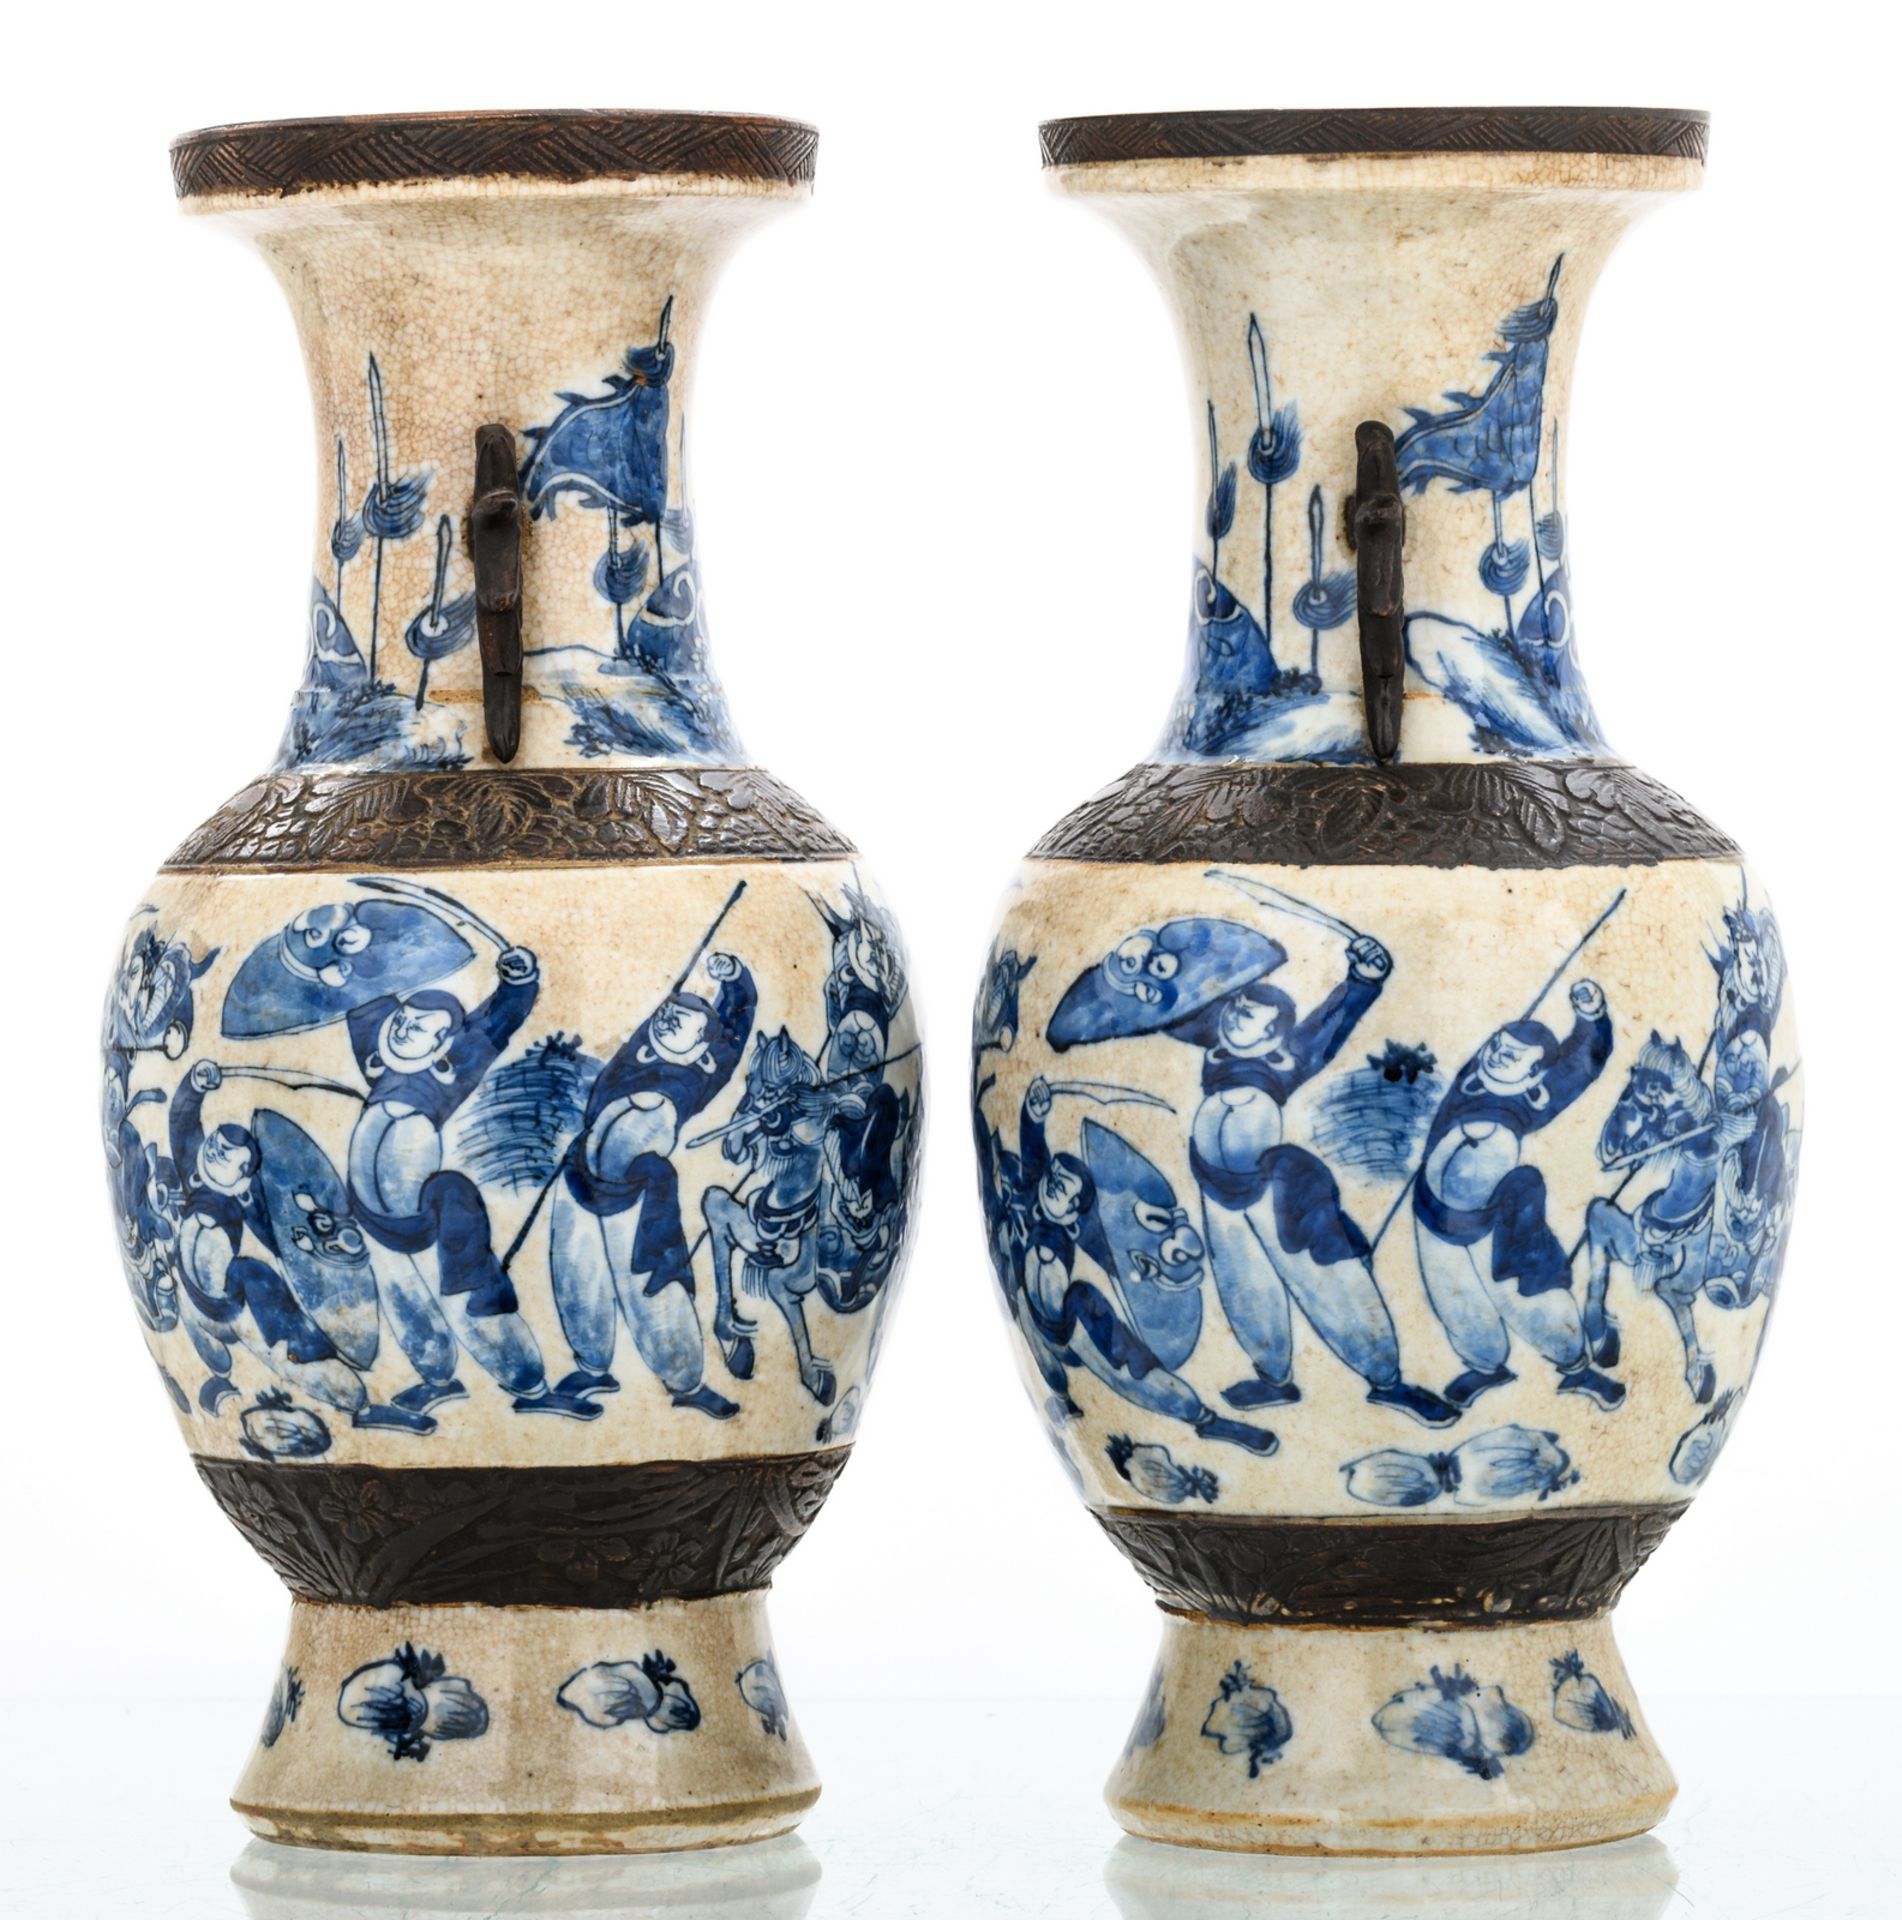 Two Chinese baluster shaped stoneware vases, blue and white decorated with warriors, marked, about - Image 4 of 6